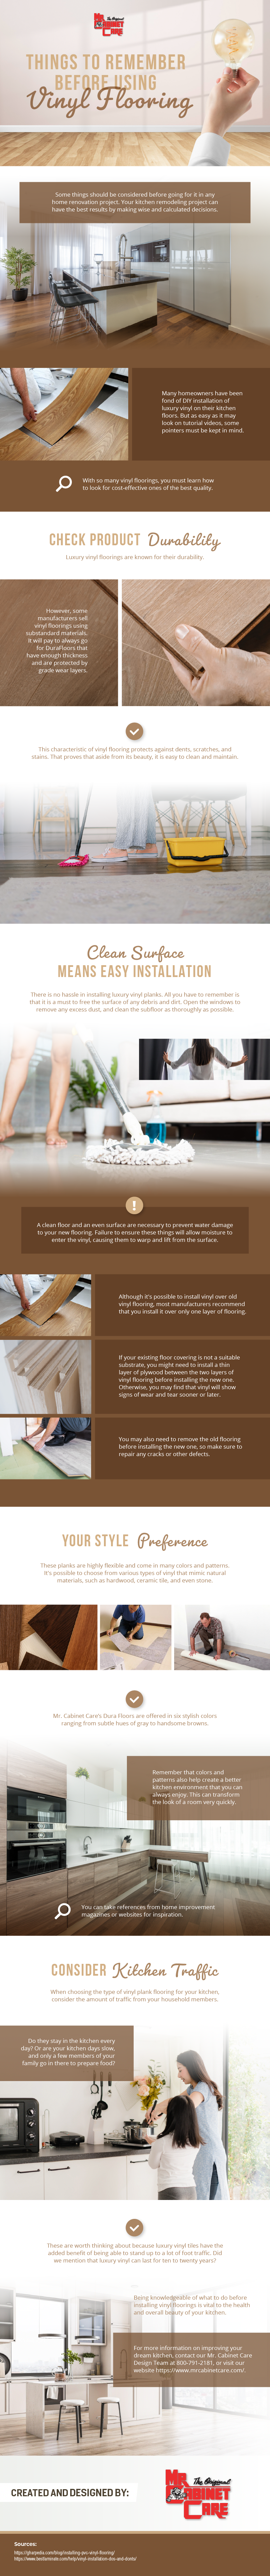 Things to Remember Before Using Vinyl Flooring [Infographic]